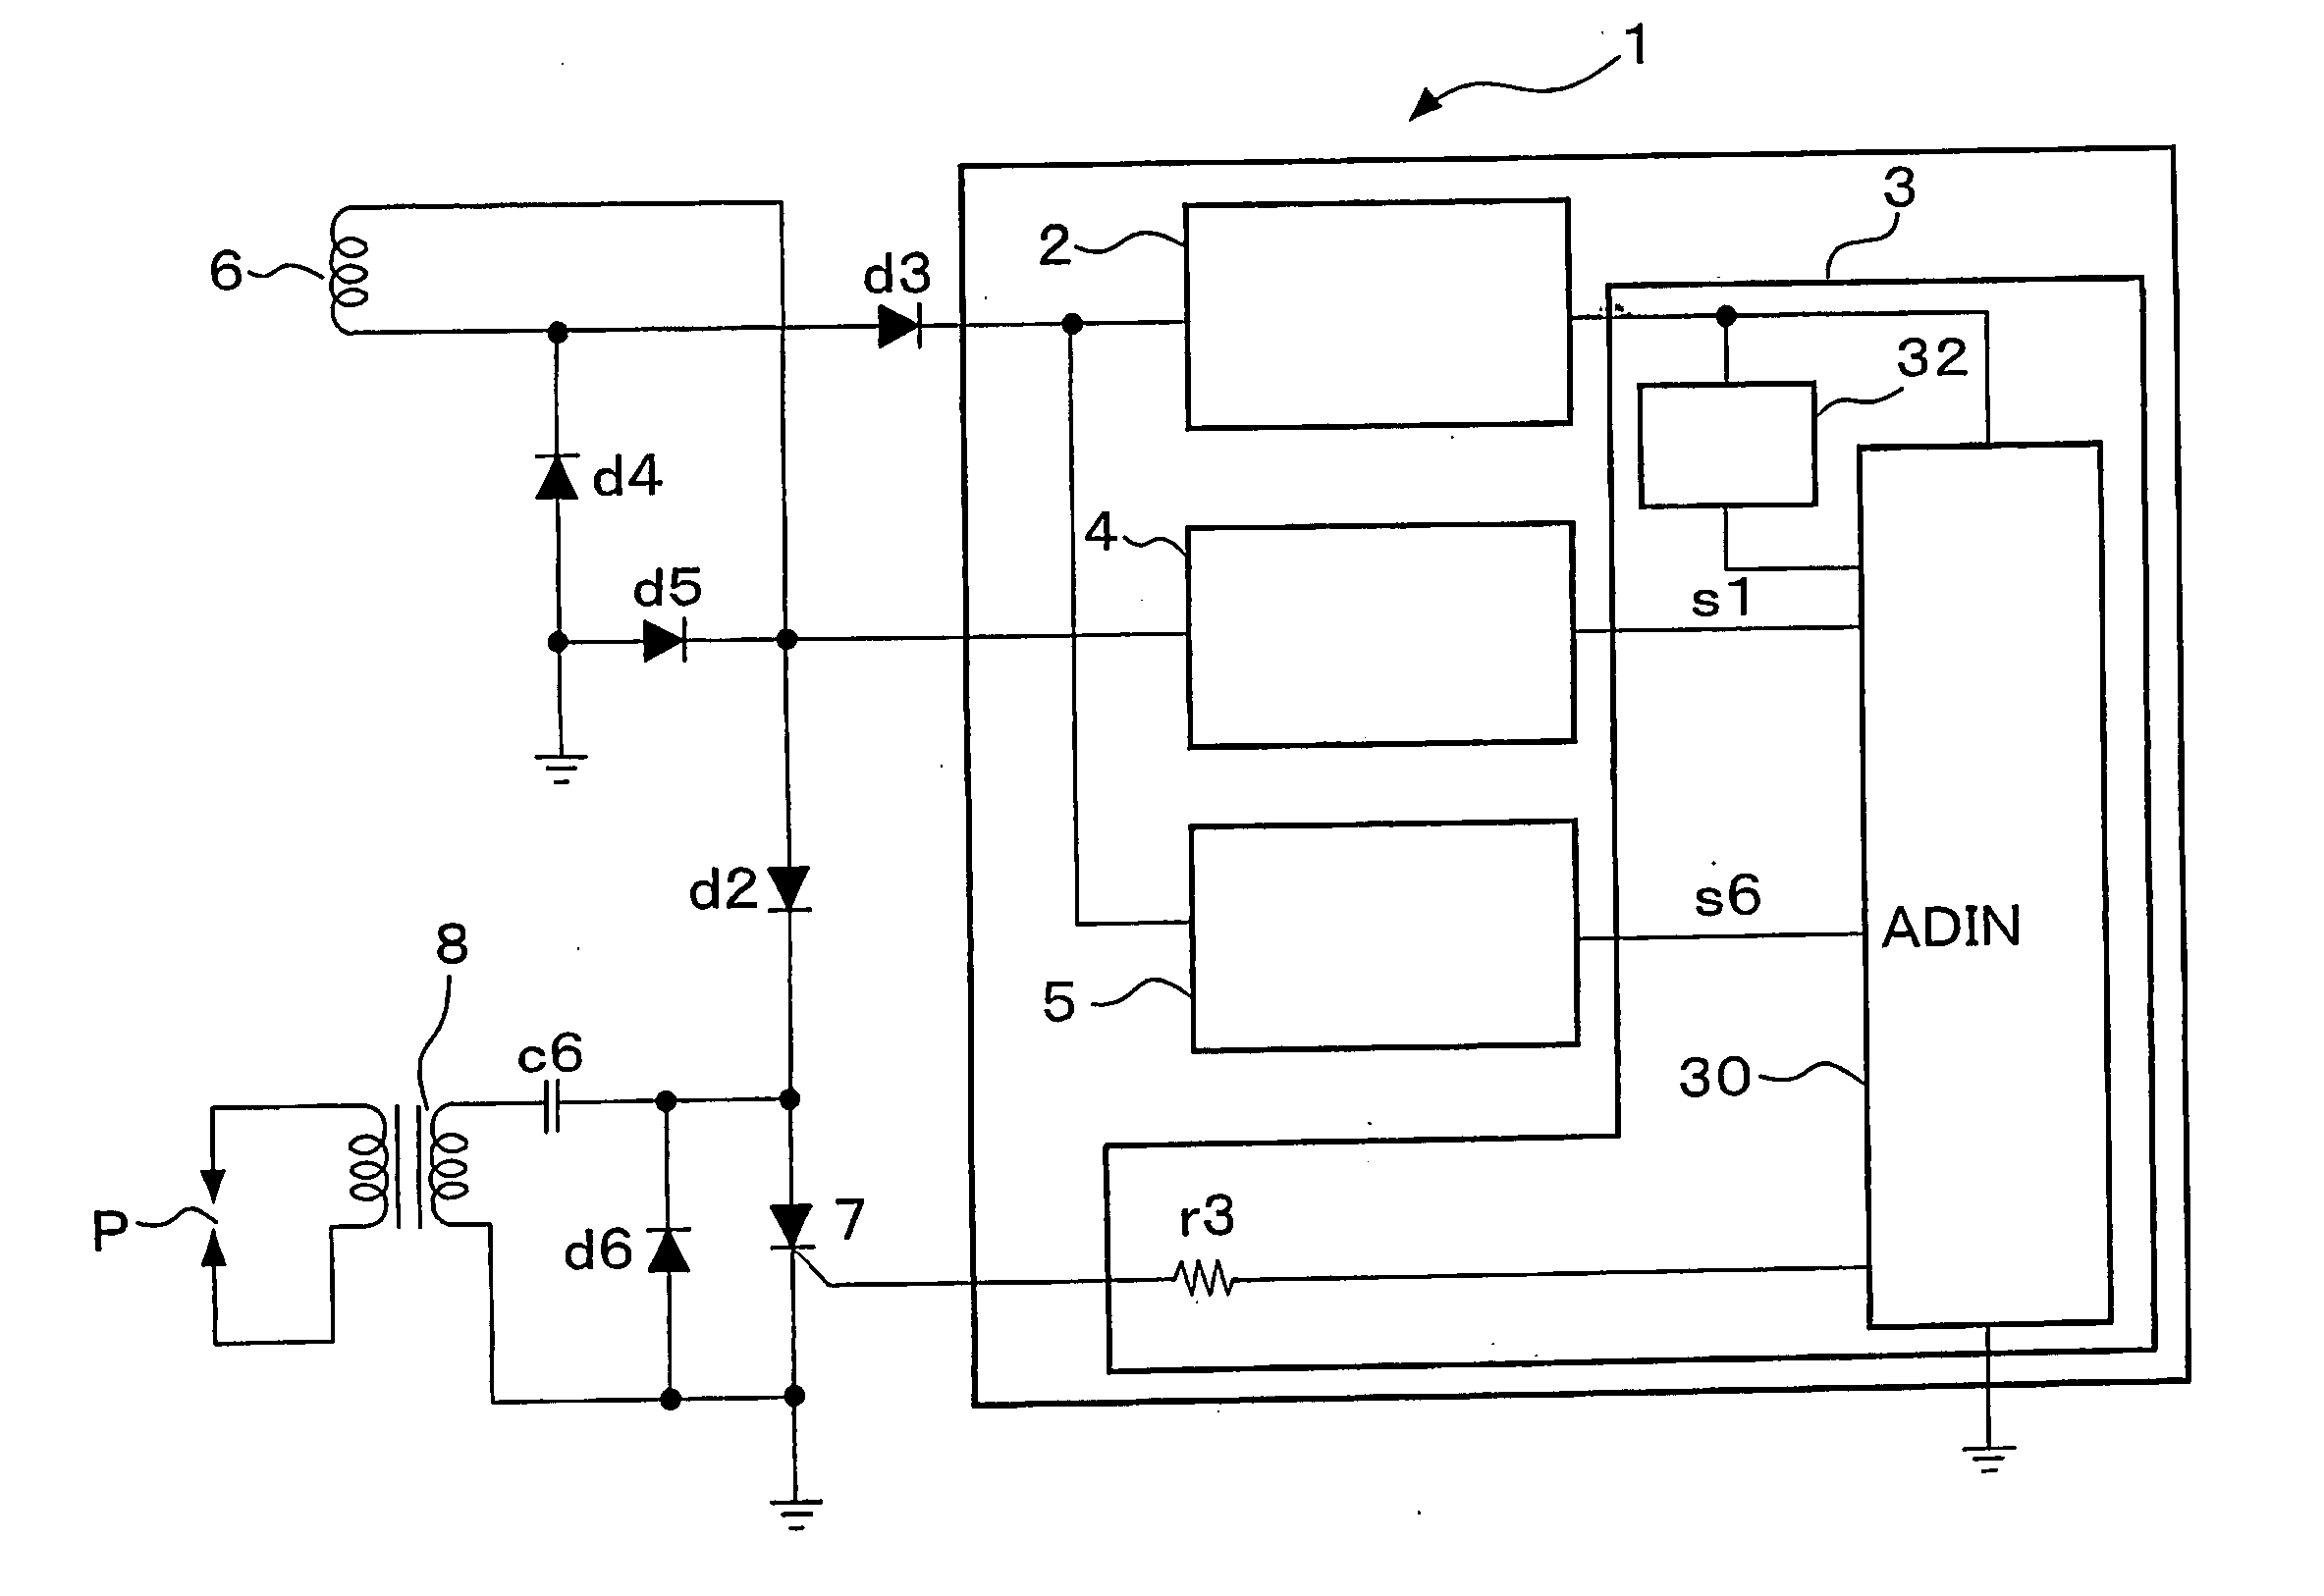 Ignition timing control method for internal combustion engine-use ignition device and ignition timing control device